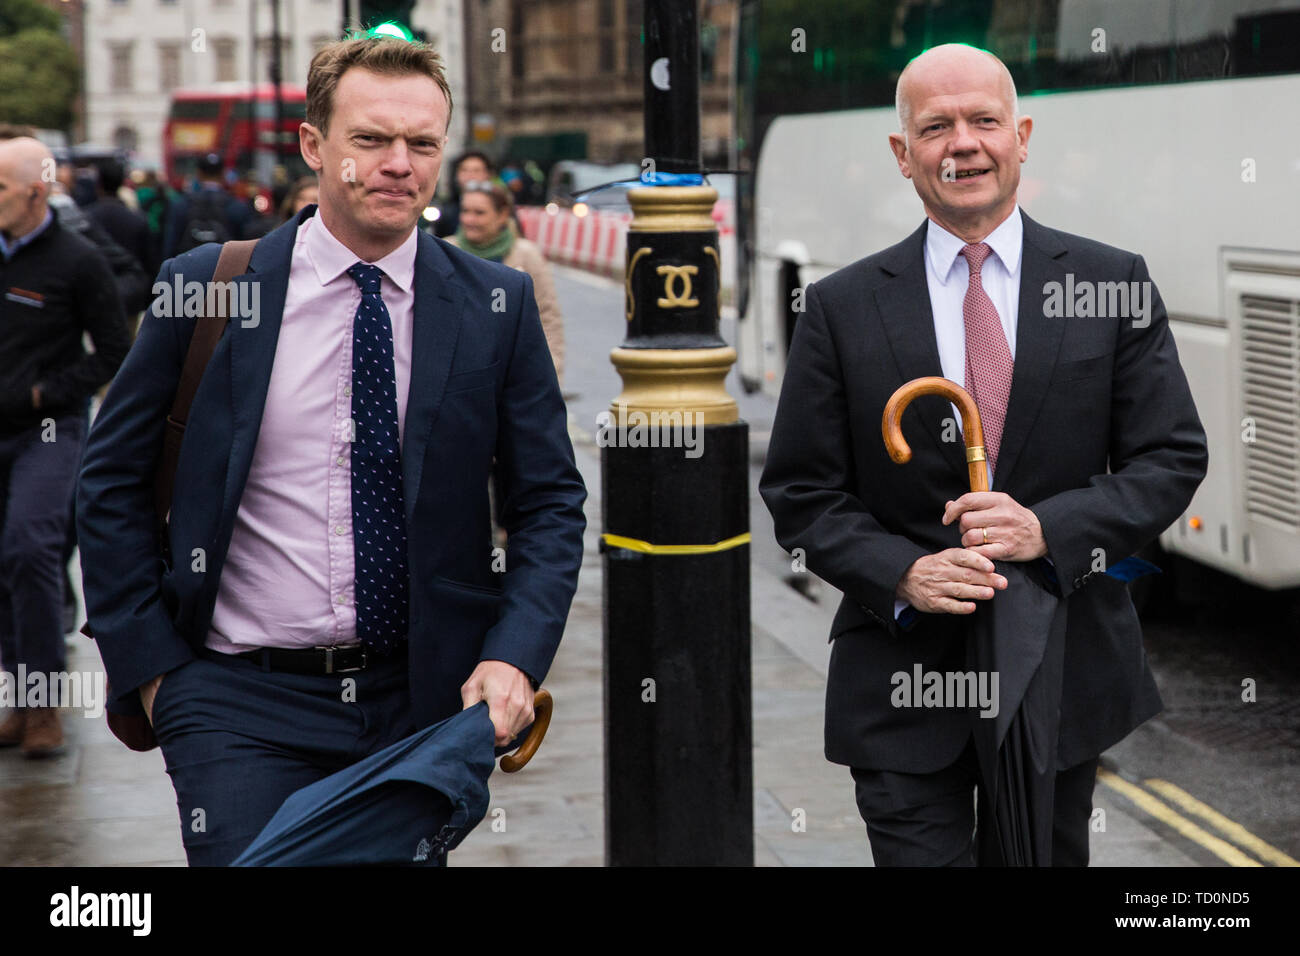 London, UK. 10 June, 2019. William Hague (r), life peer and former Leader of the Opposition, arrives at Parliament on the day that the final list of candidates for the Conservative Party leadership was confirmed. Credit: Mark Kerrison/Alamy Live News Stock Photo